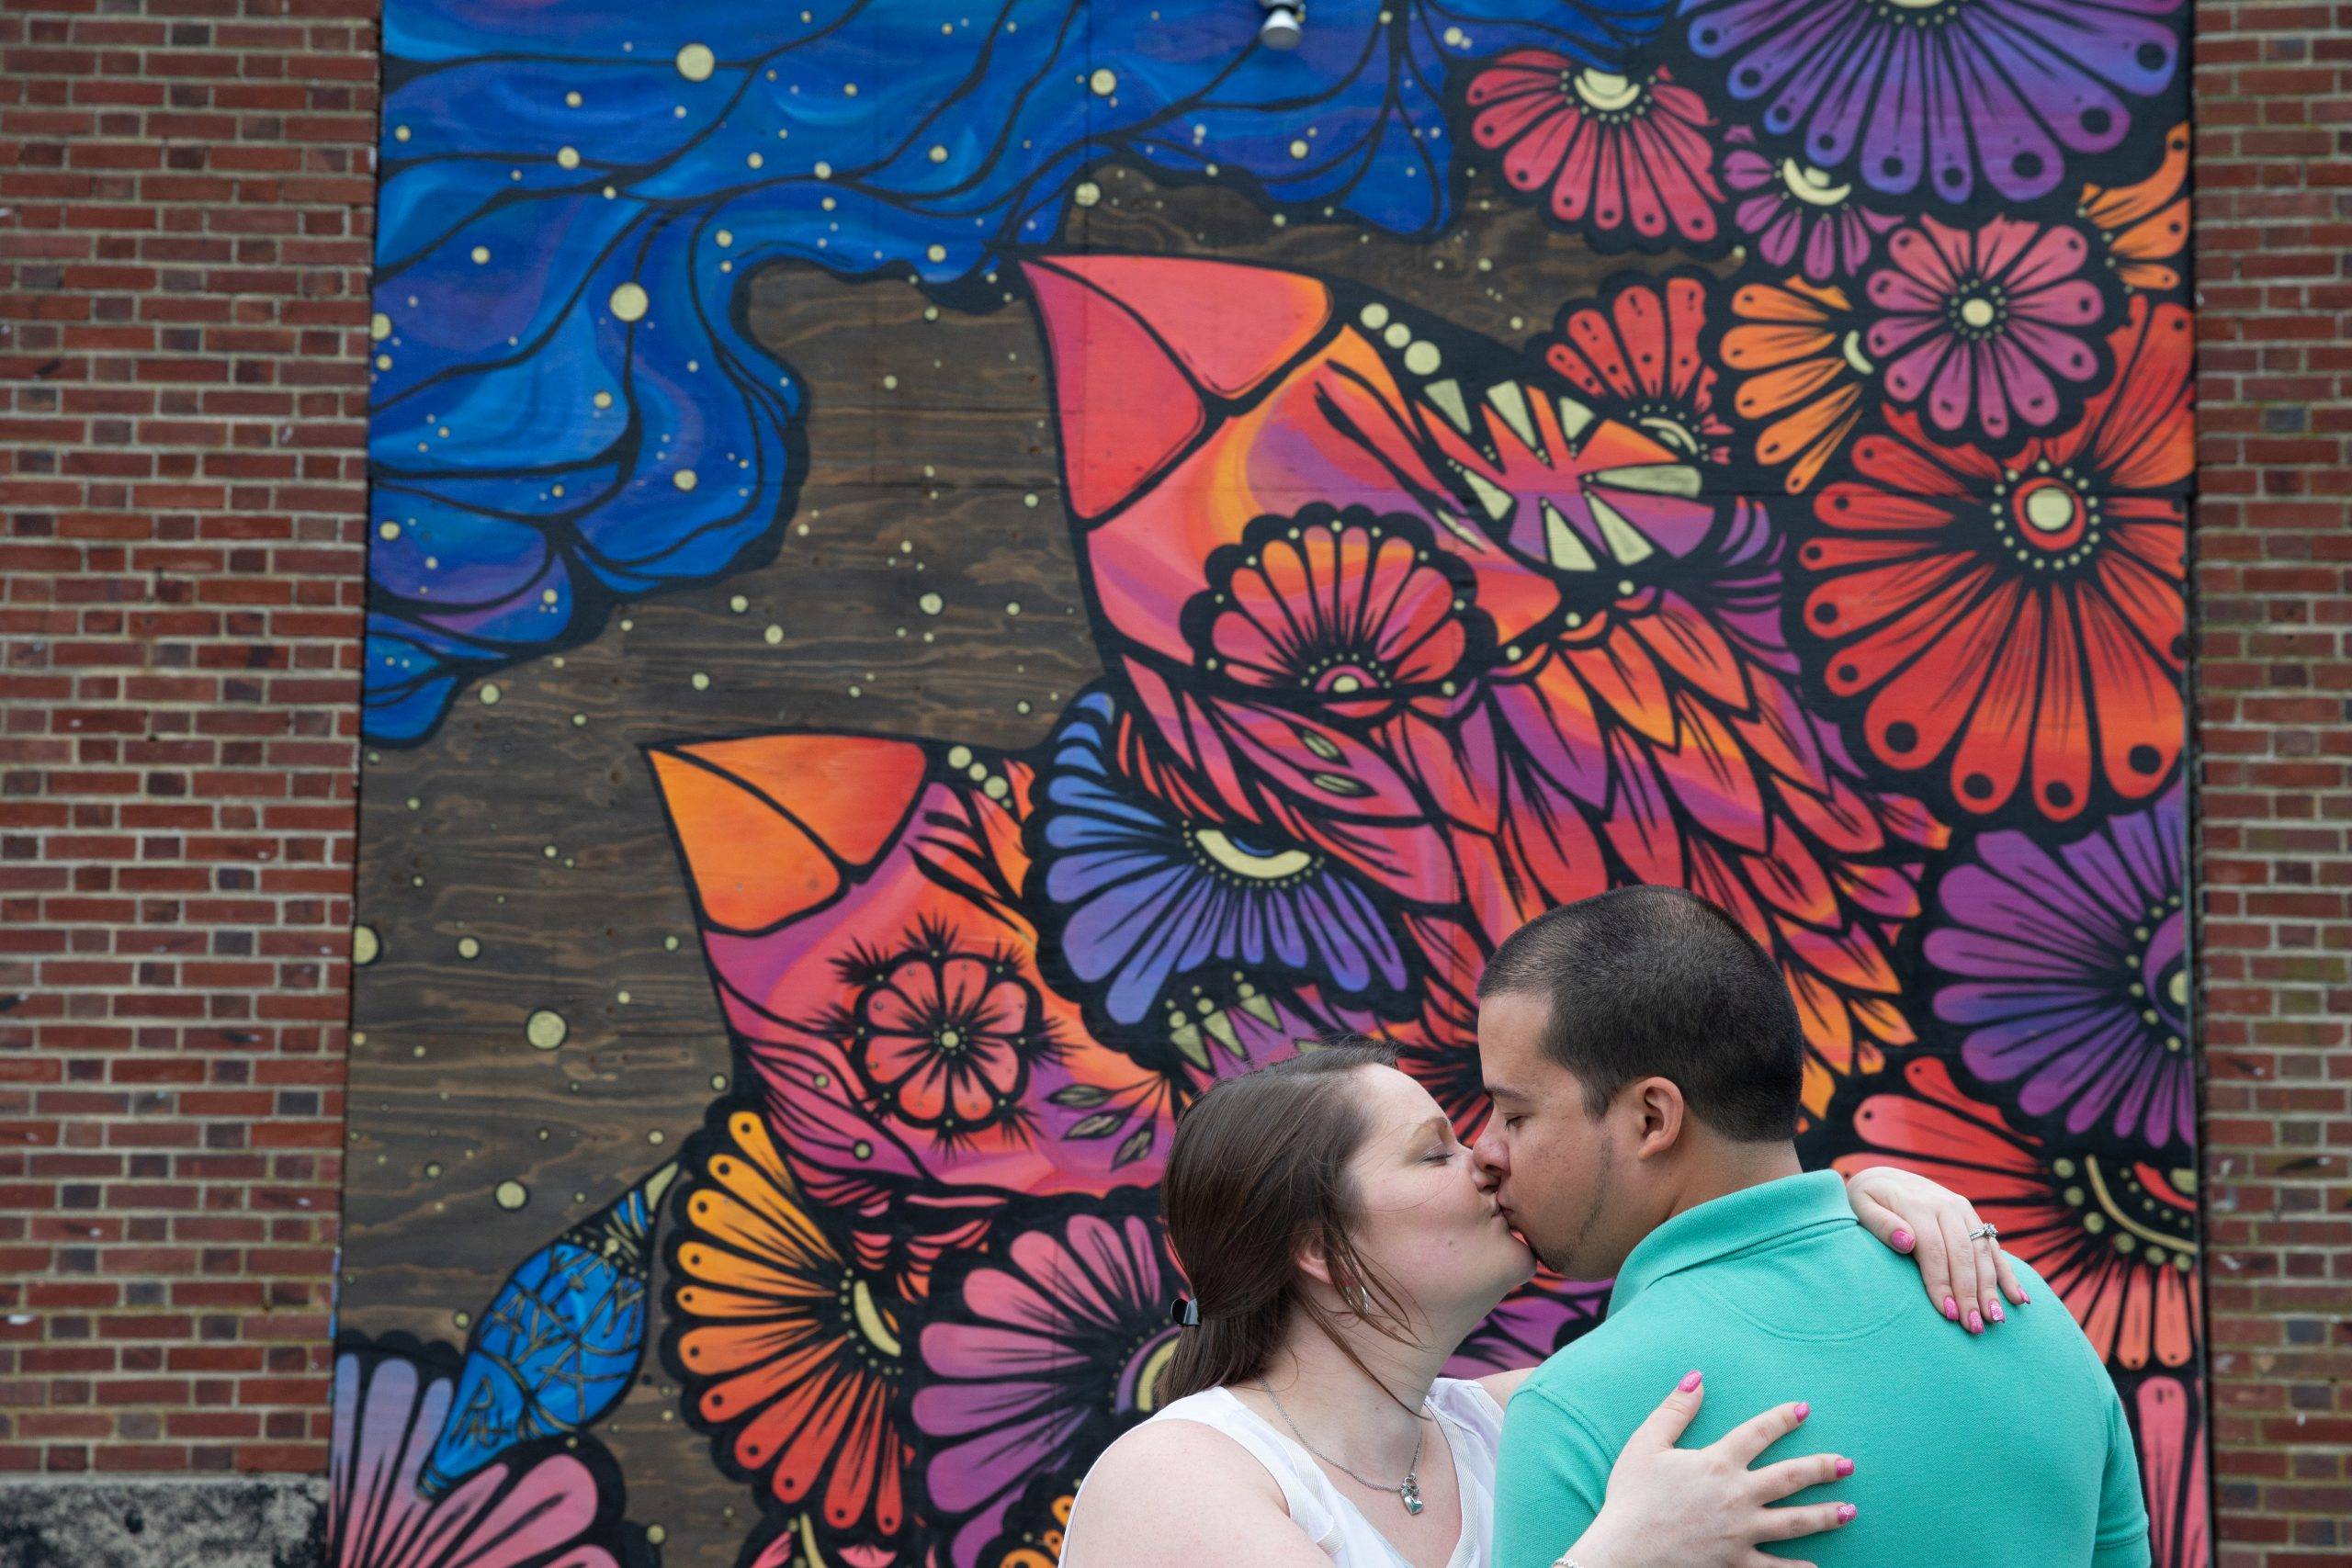 A couple kisses in front of a colorful mural.